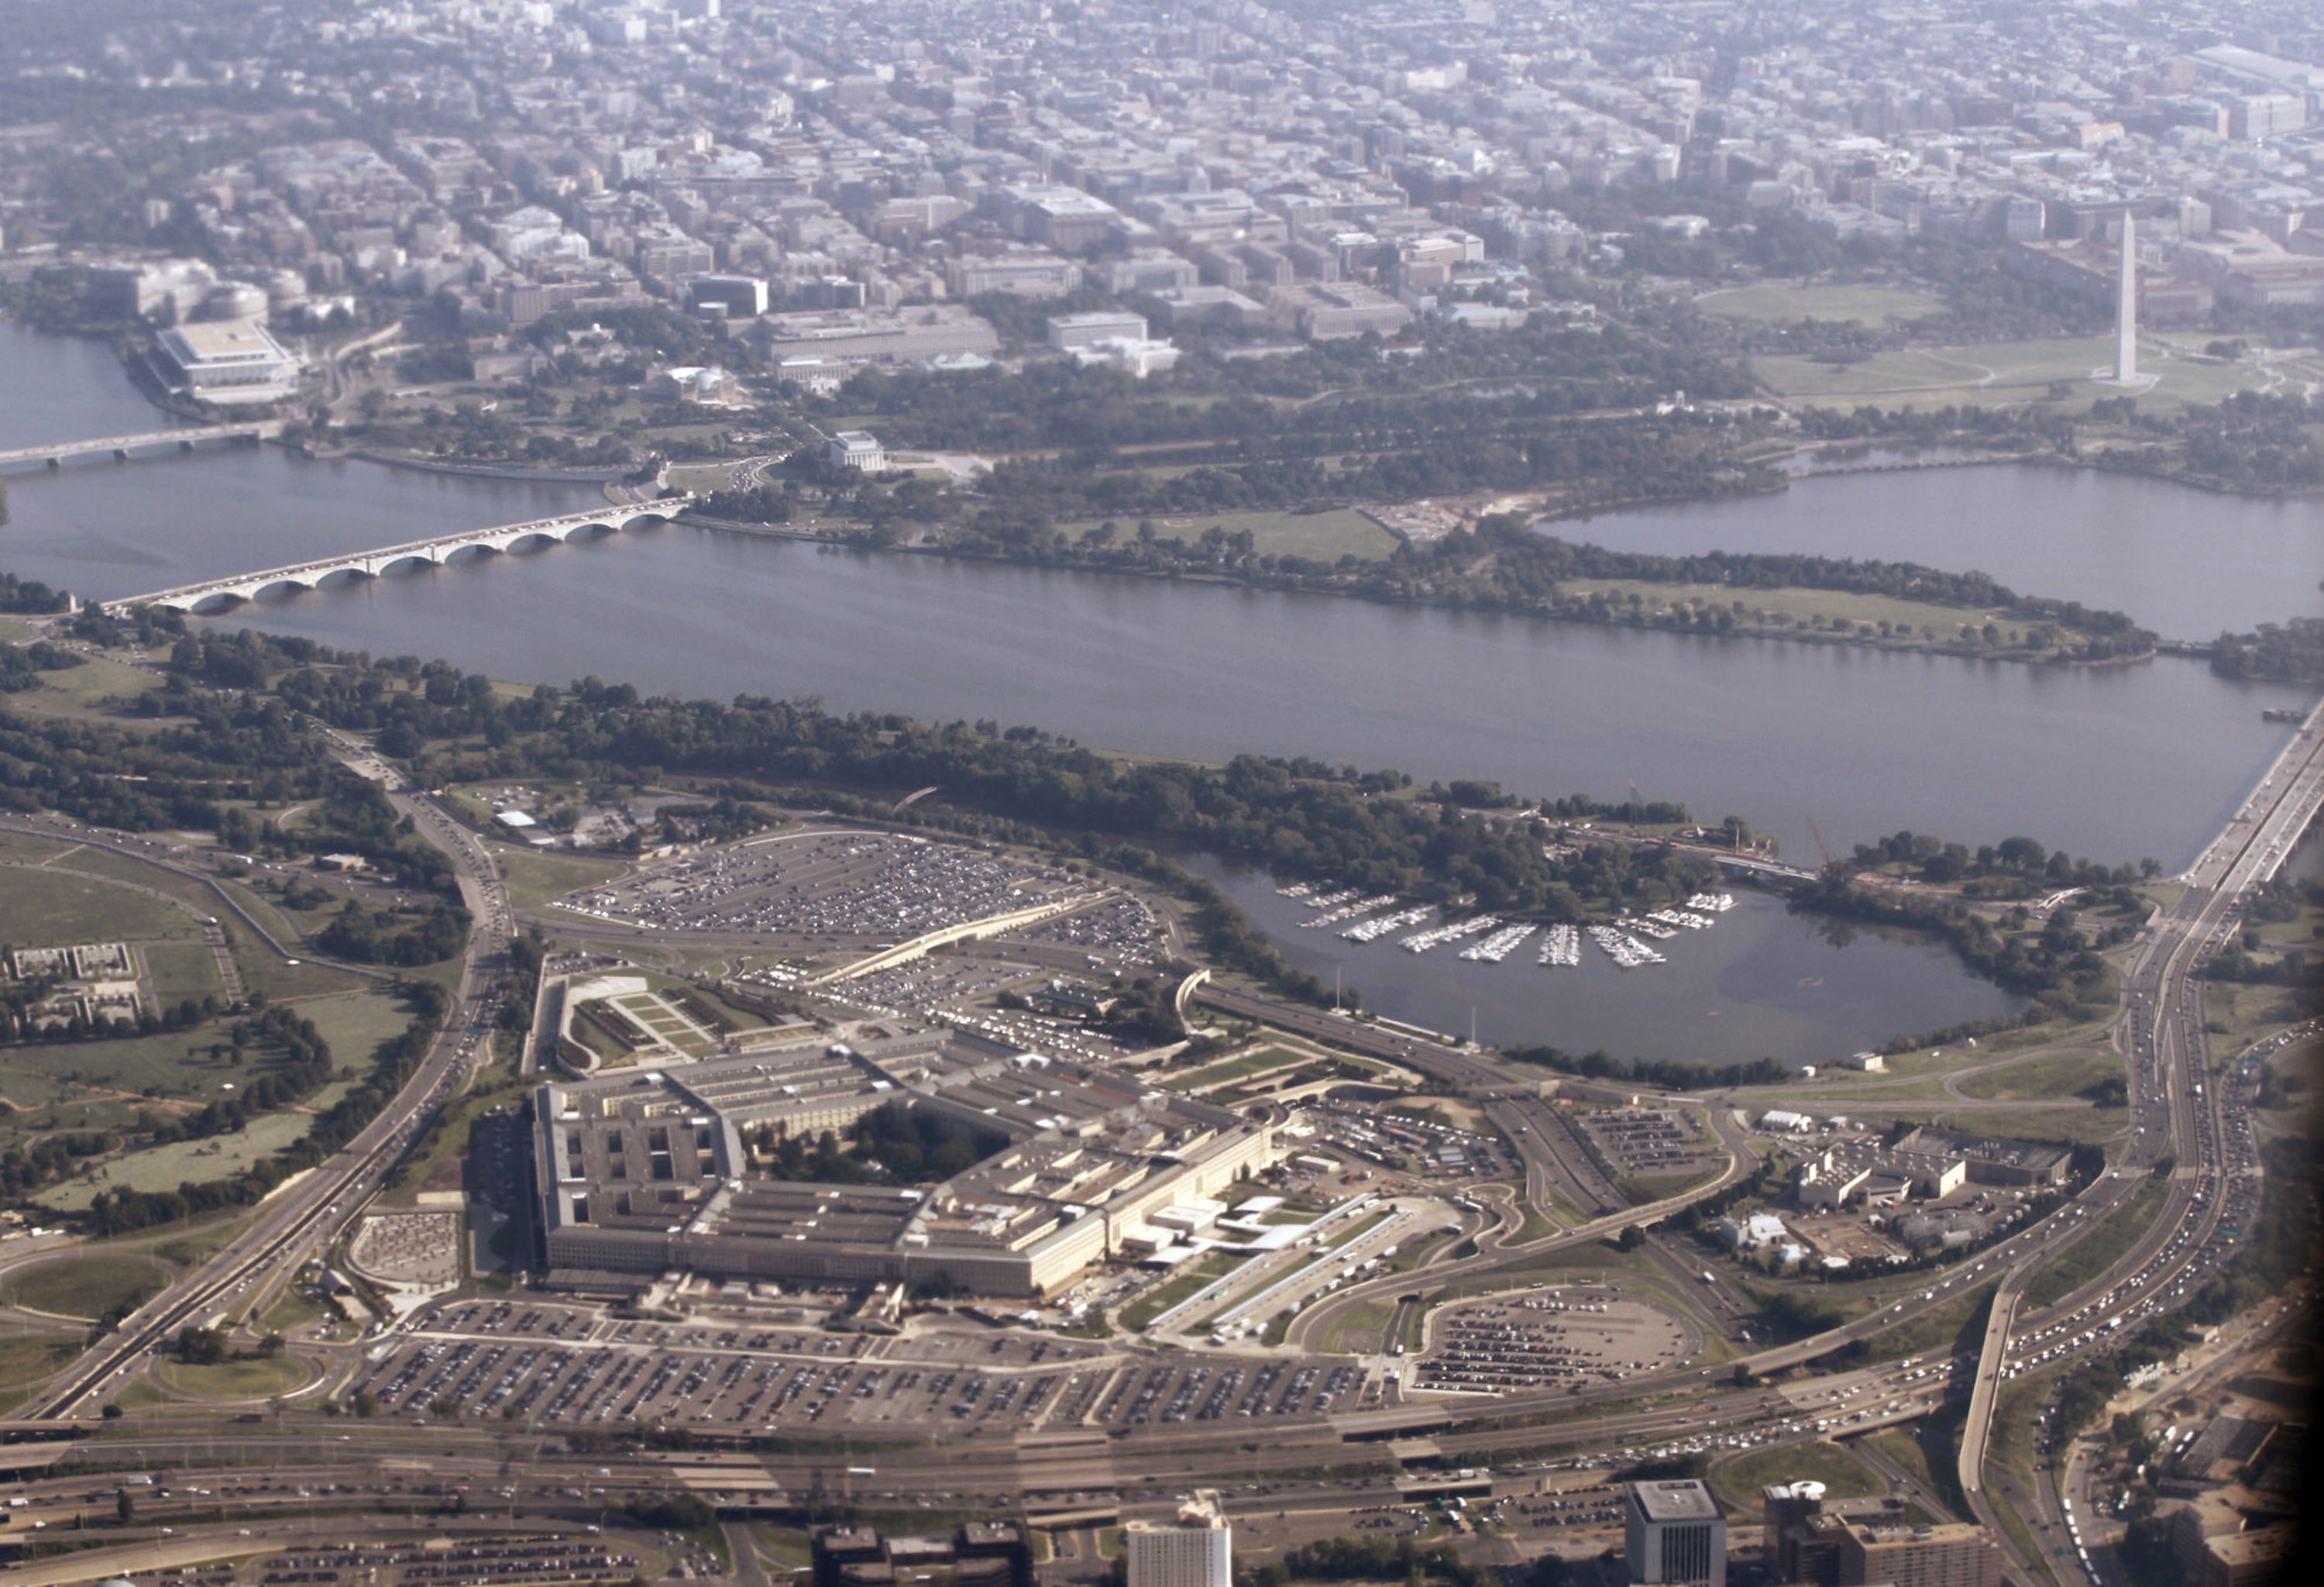 An aerial view of the Pentagon, Potomac River and Washington Monument